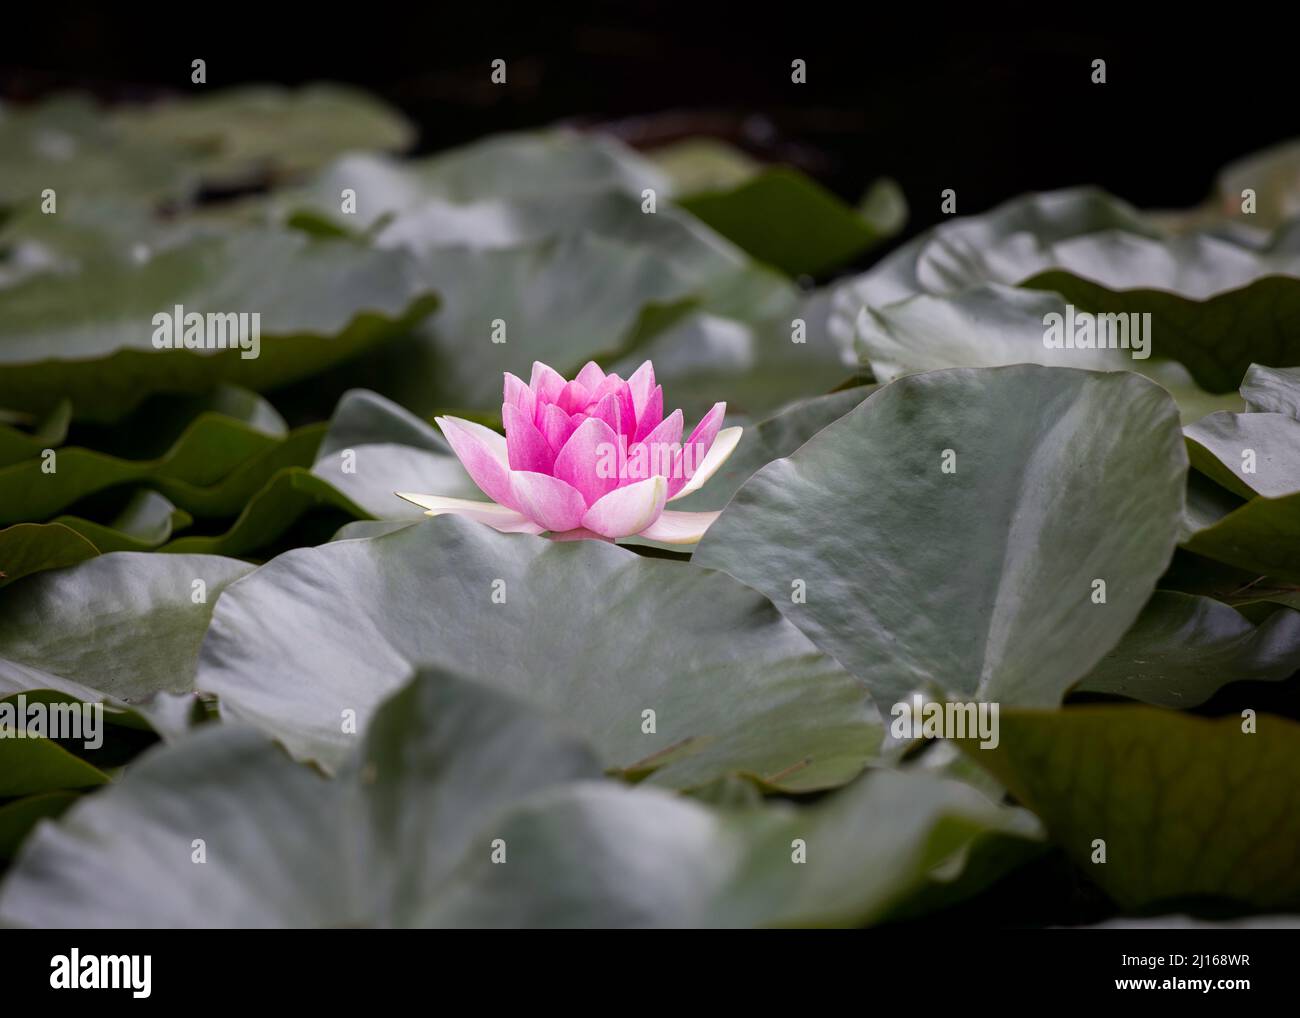 One bright pink water lily standing out surrounded by large deep green leaves Stock Photo